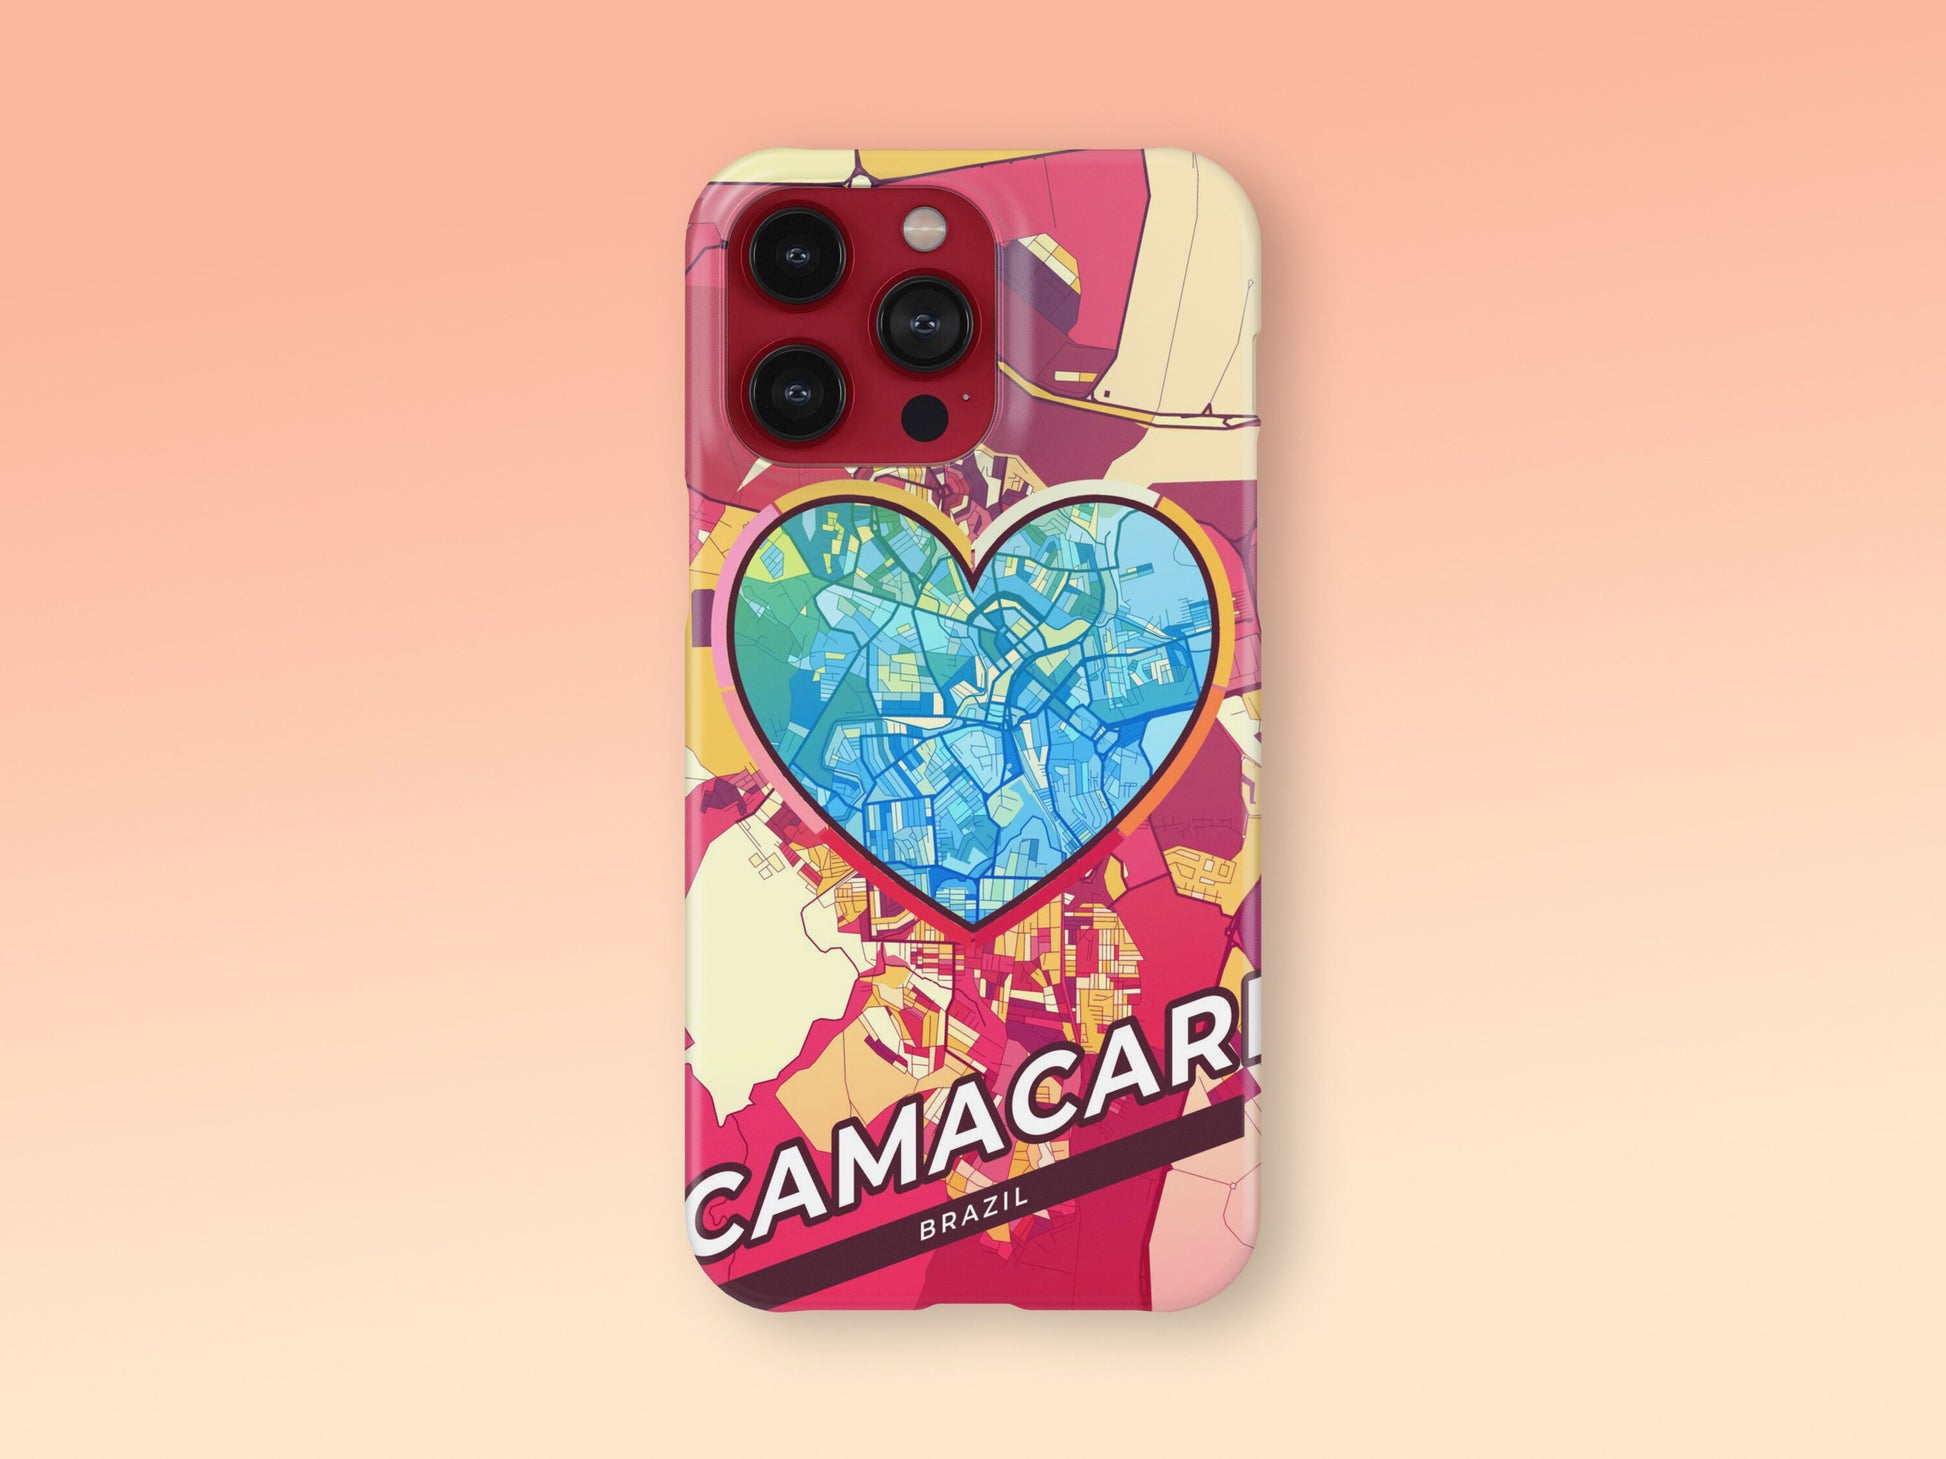 Camacari Brazil slim phone case with colorful icon. Birthday, wedding or housewarming gift. Couple match cases. 2